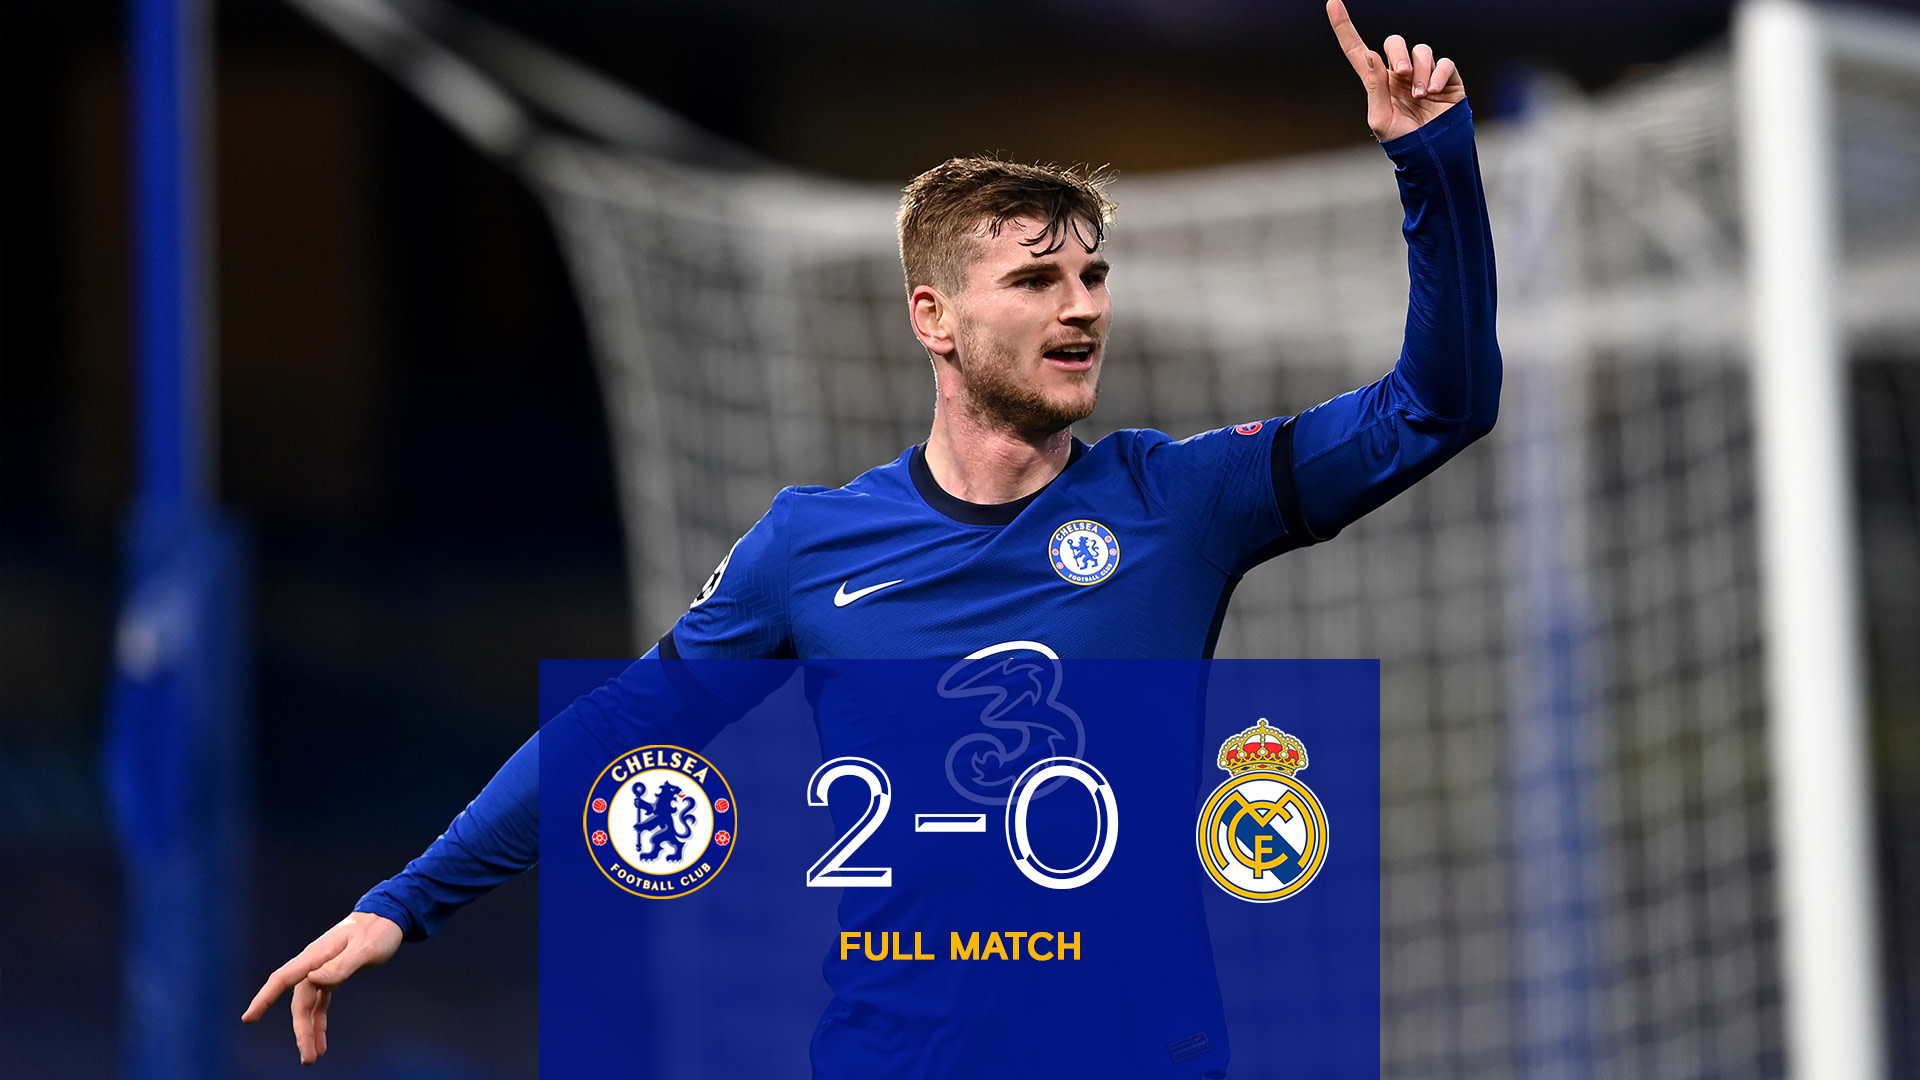 Full match Chelsea 2-0 Real Madrid (H) Champions League Video Official Site Chelsea Football Club